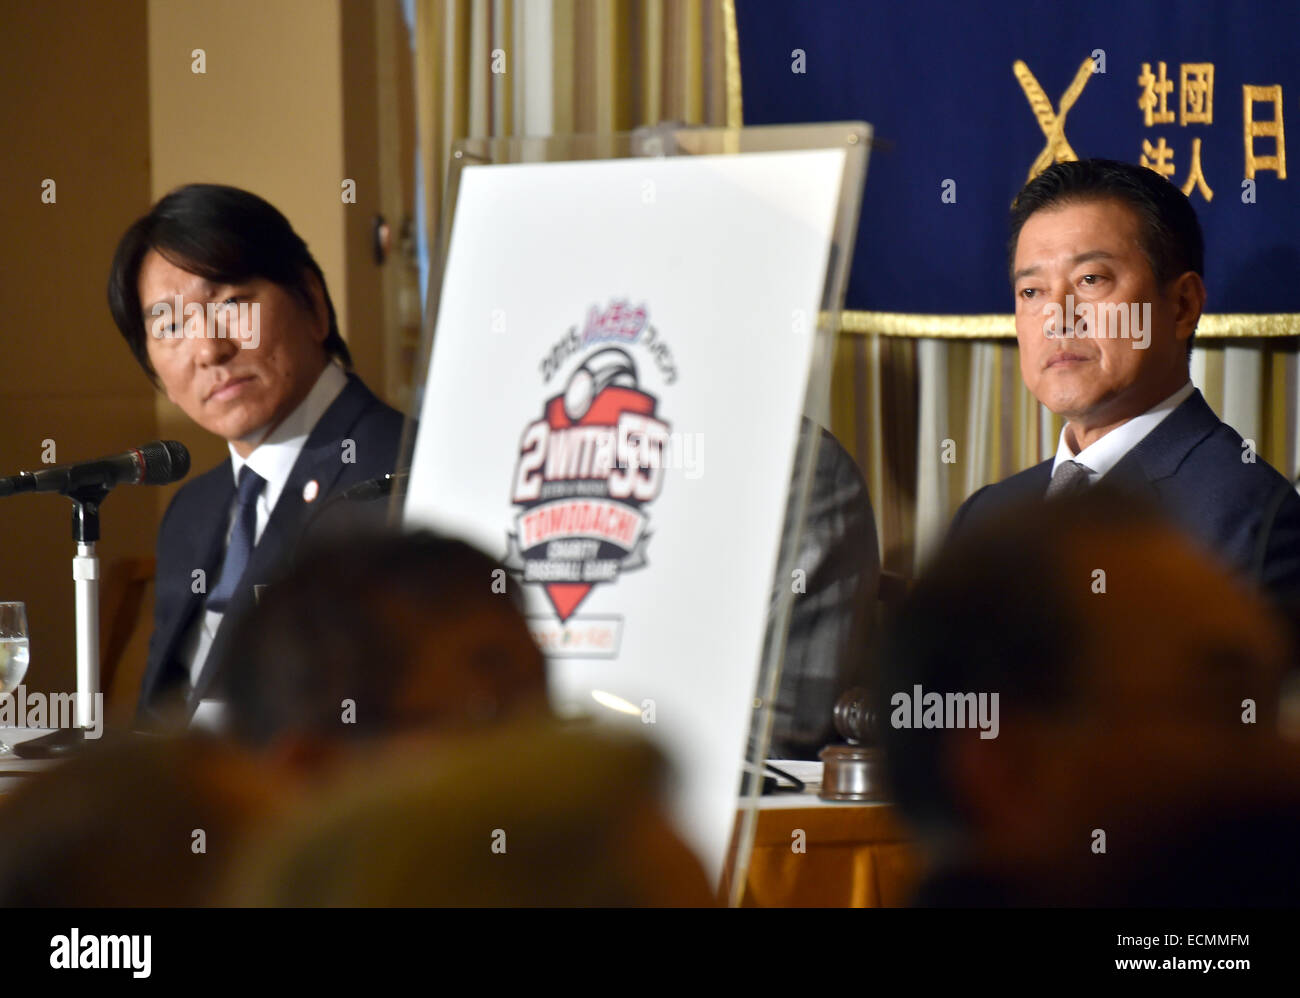 Tokyo, Japan. 17th Dec, 2014. Ex-Yankee Hideki Matsui, left, and his former teammate and manager of Yomiuri Giants ball club attend a news conference at Tokyo's Foreign Correspondents' Club of Japan on Wednesday, December 17, 2014. Matsui along with his former Yankee teammate Derek Jeter will co-hosted a charity baseball event sponsored by Morinaga at Tokyo Dome in March for junior high school students from the northeastern disaster-hit region as well as American students living in Japan. © Natsuki Sakai/AFLO/Alamy Live News Stock Photo